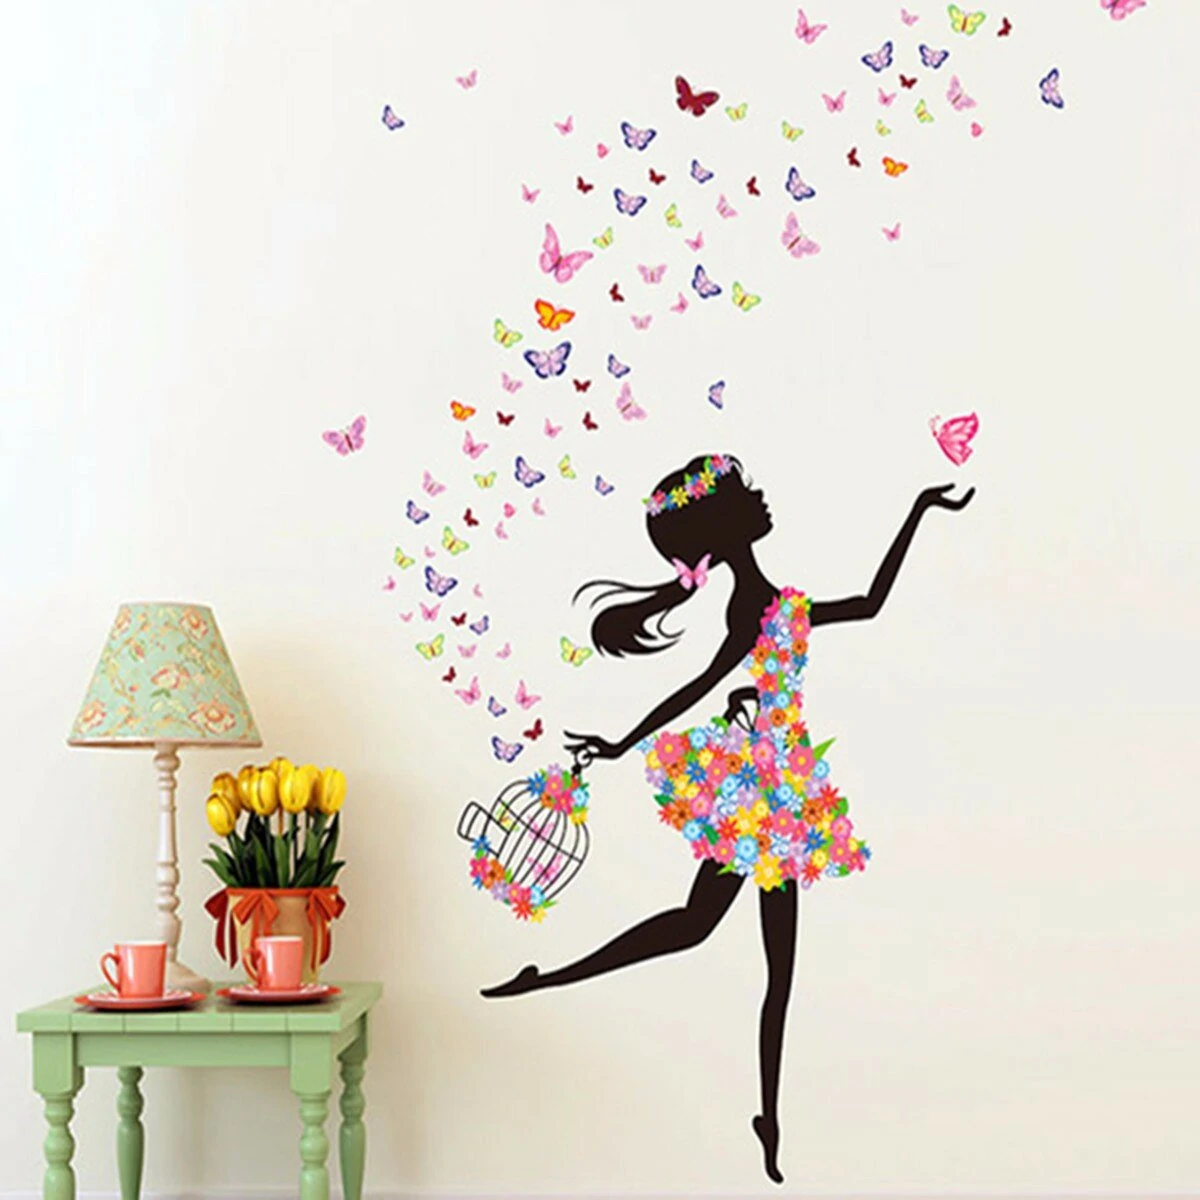 Diy wall stickers flower elf dance girl butterfly wallpaper wall decal home office living room childrens bedroom wall decor